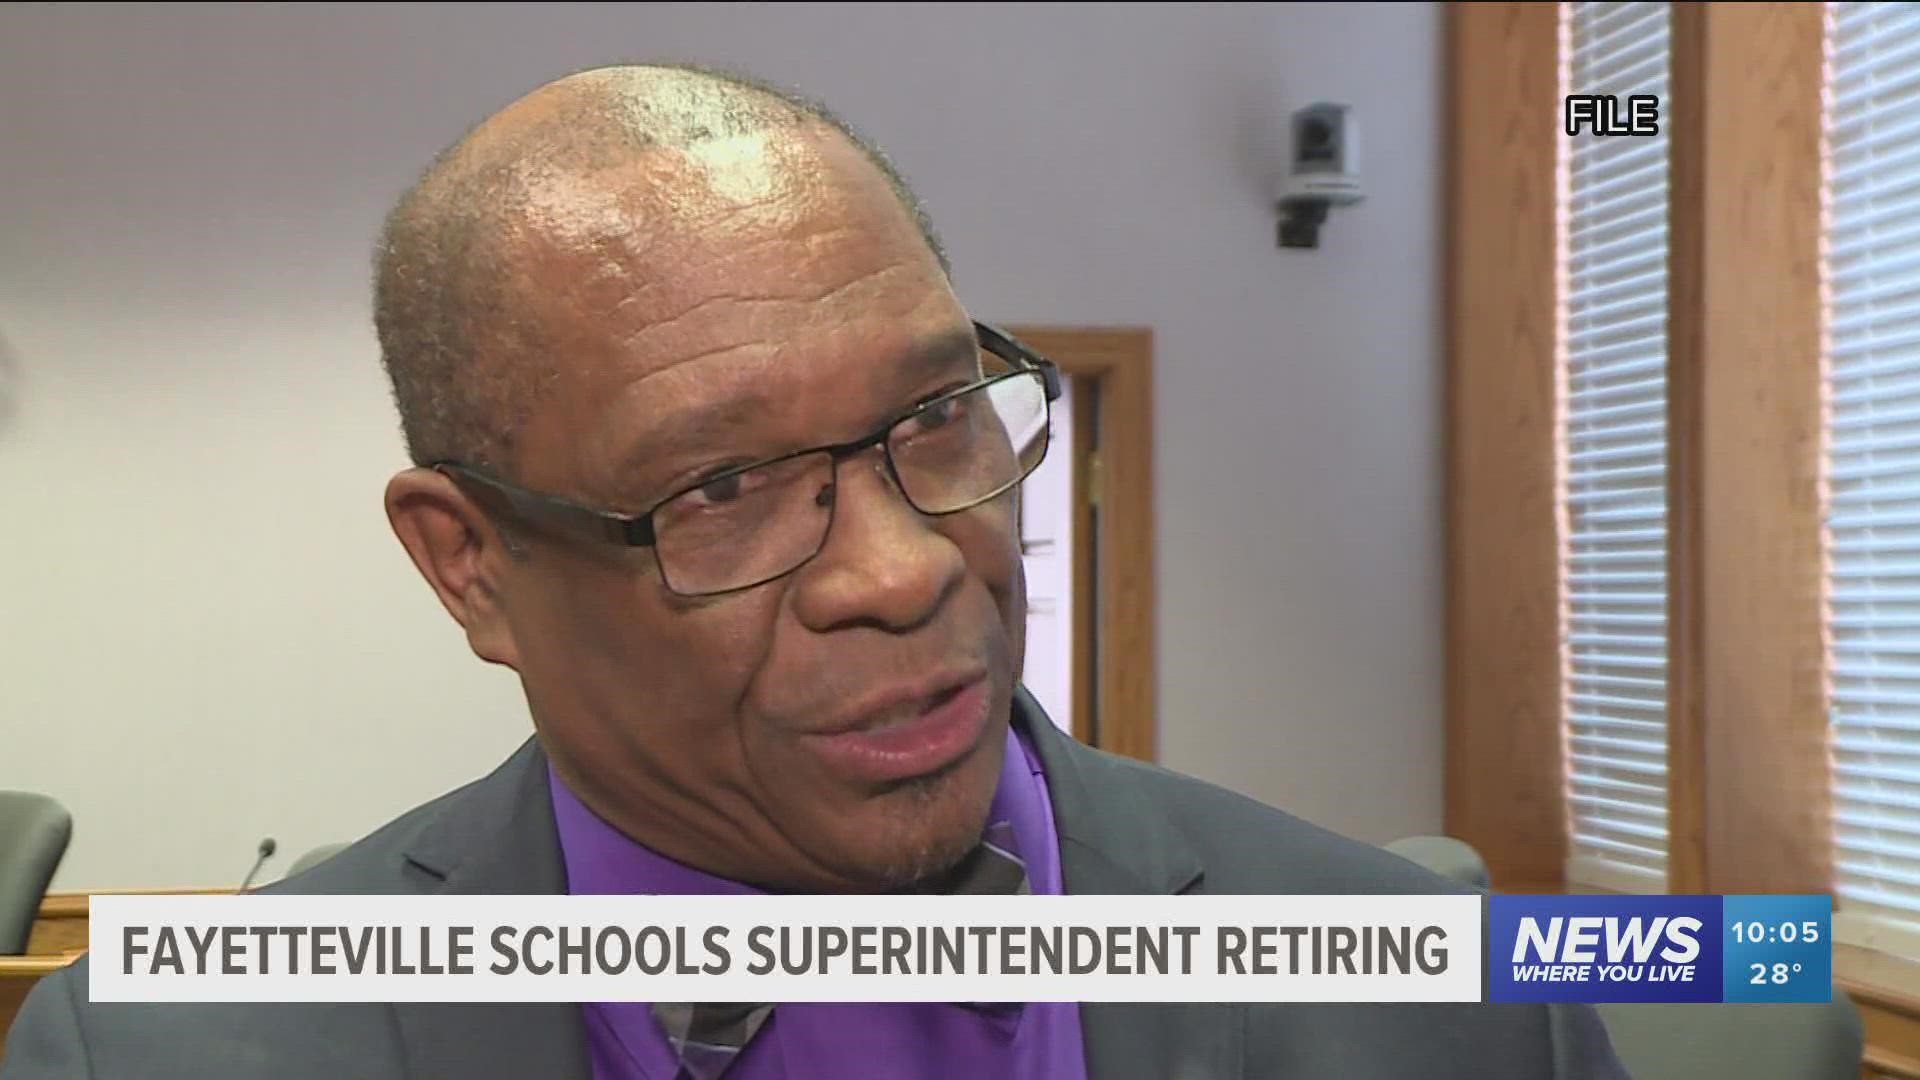 Fayetteville Public Schools's Superintendent Dr. John L. Colbert has announced his plan to retire at the end of the 2022-2023 school year.